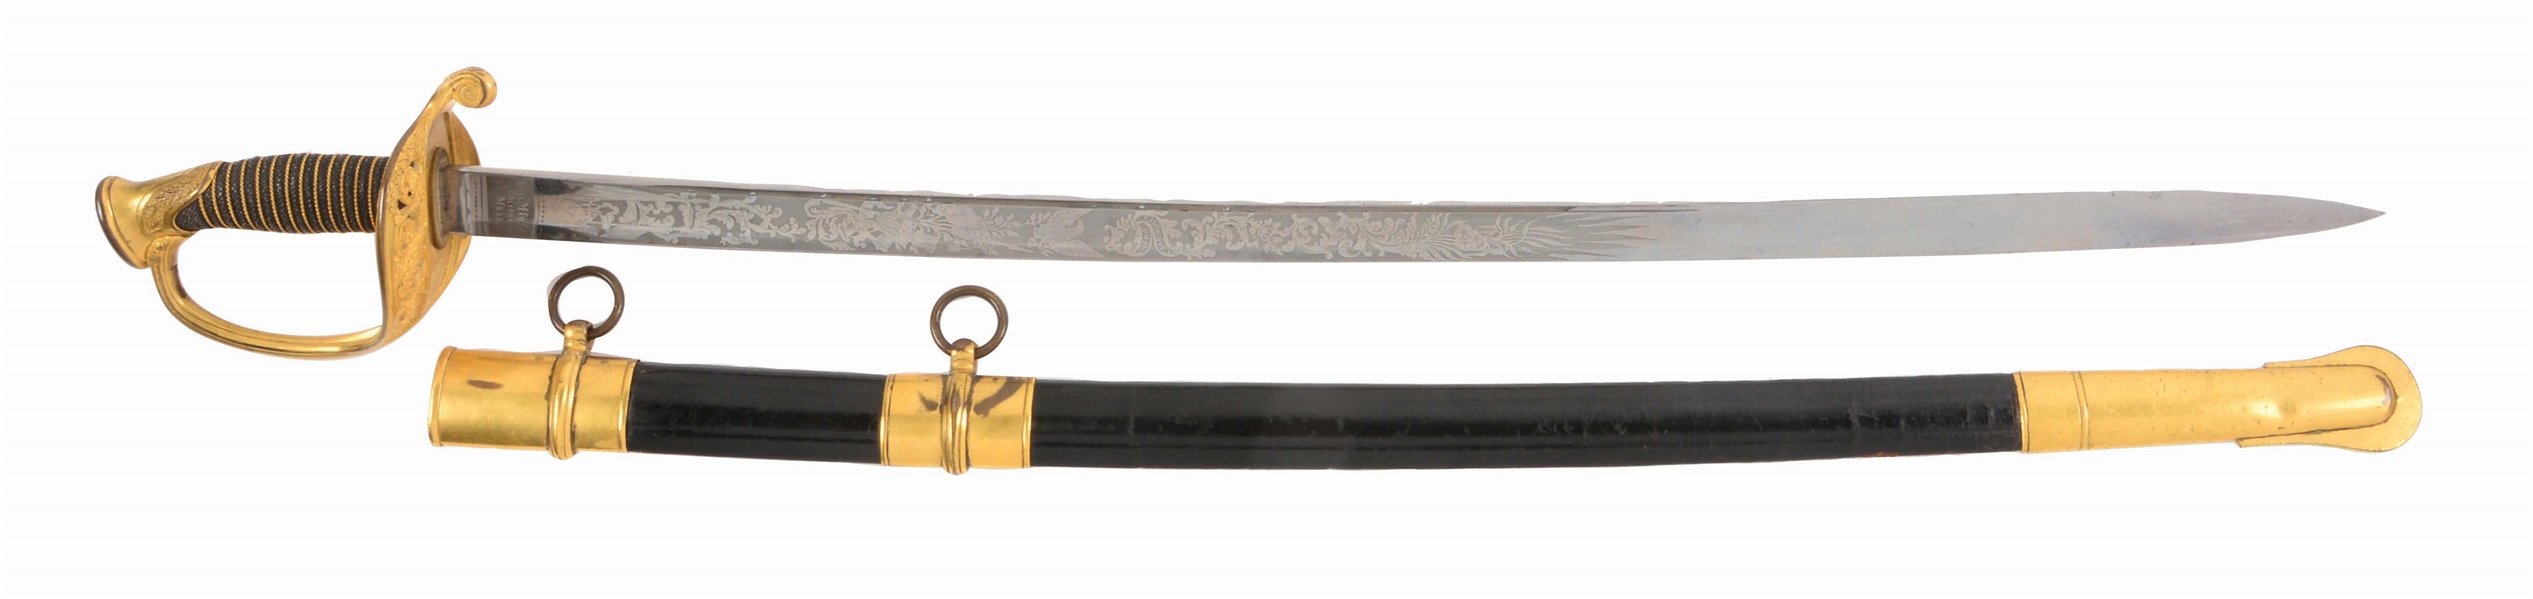 HIGH CONDITION U.S. MODEL 1850 FOOT OFFICERS SWORD BY AMES.